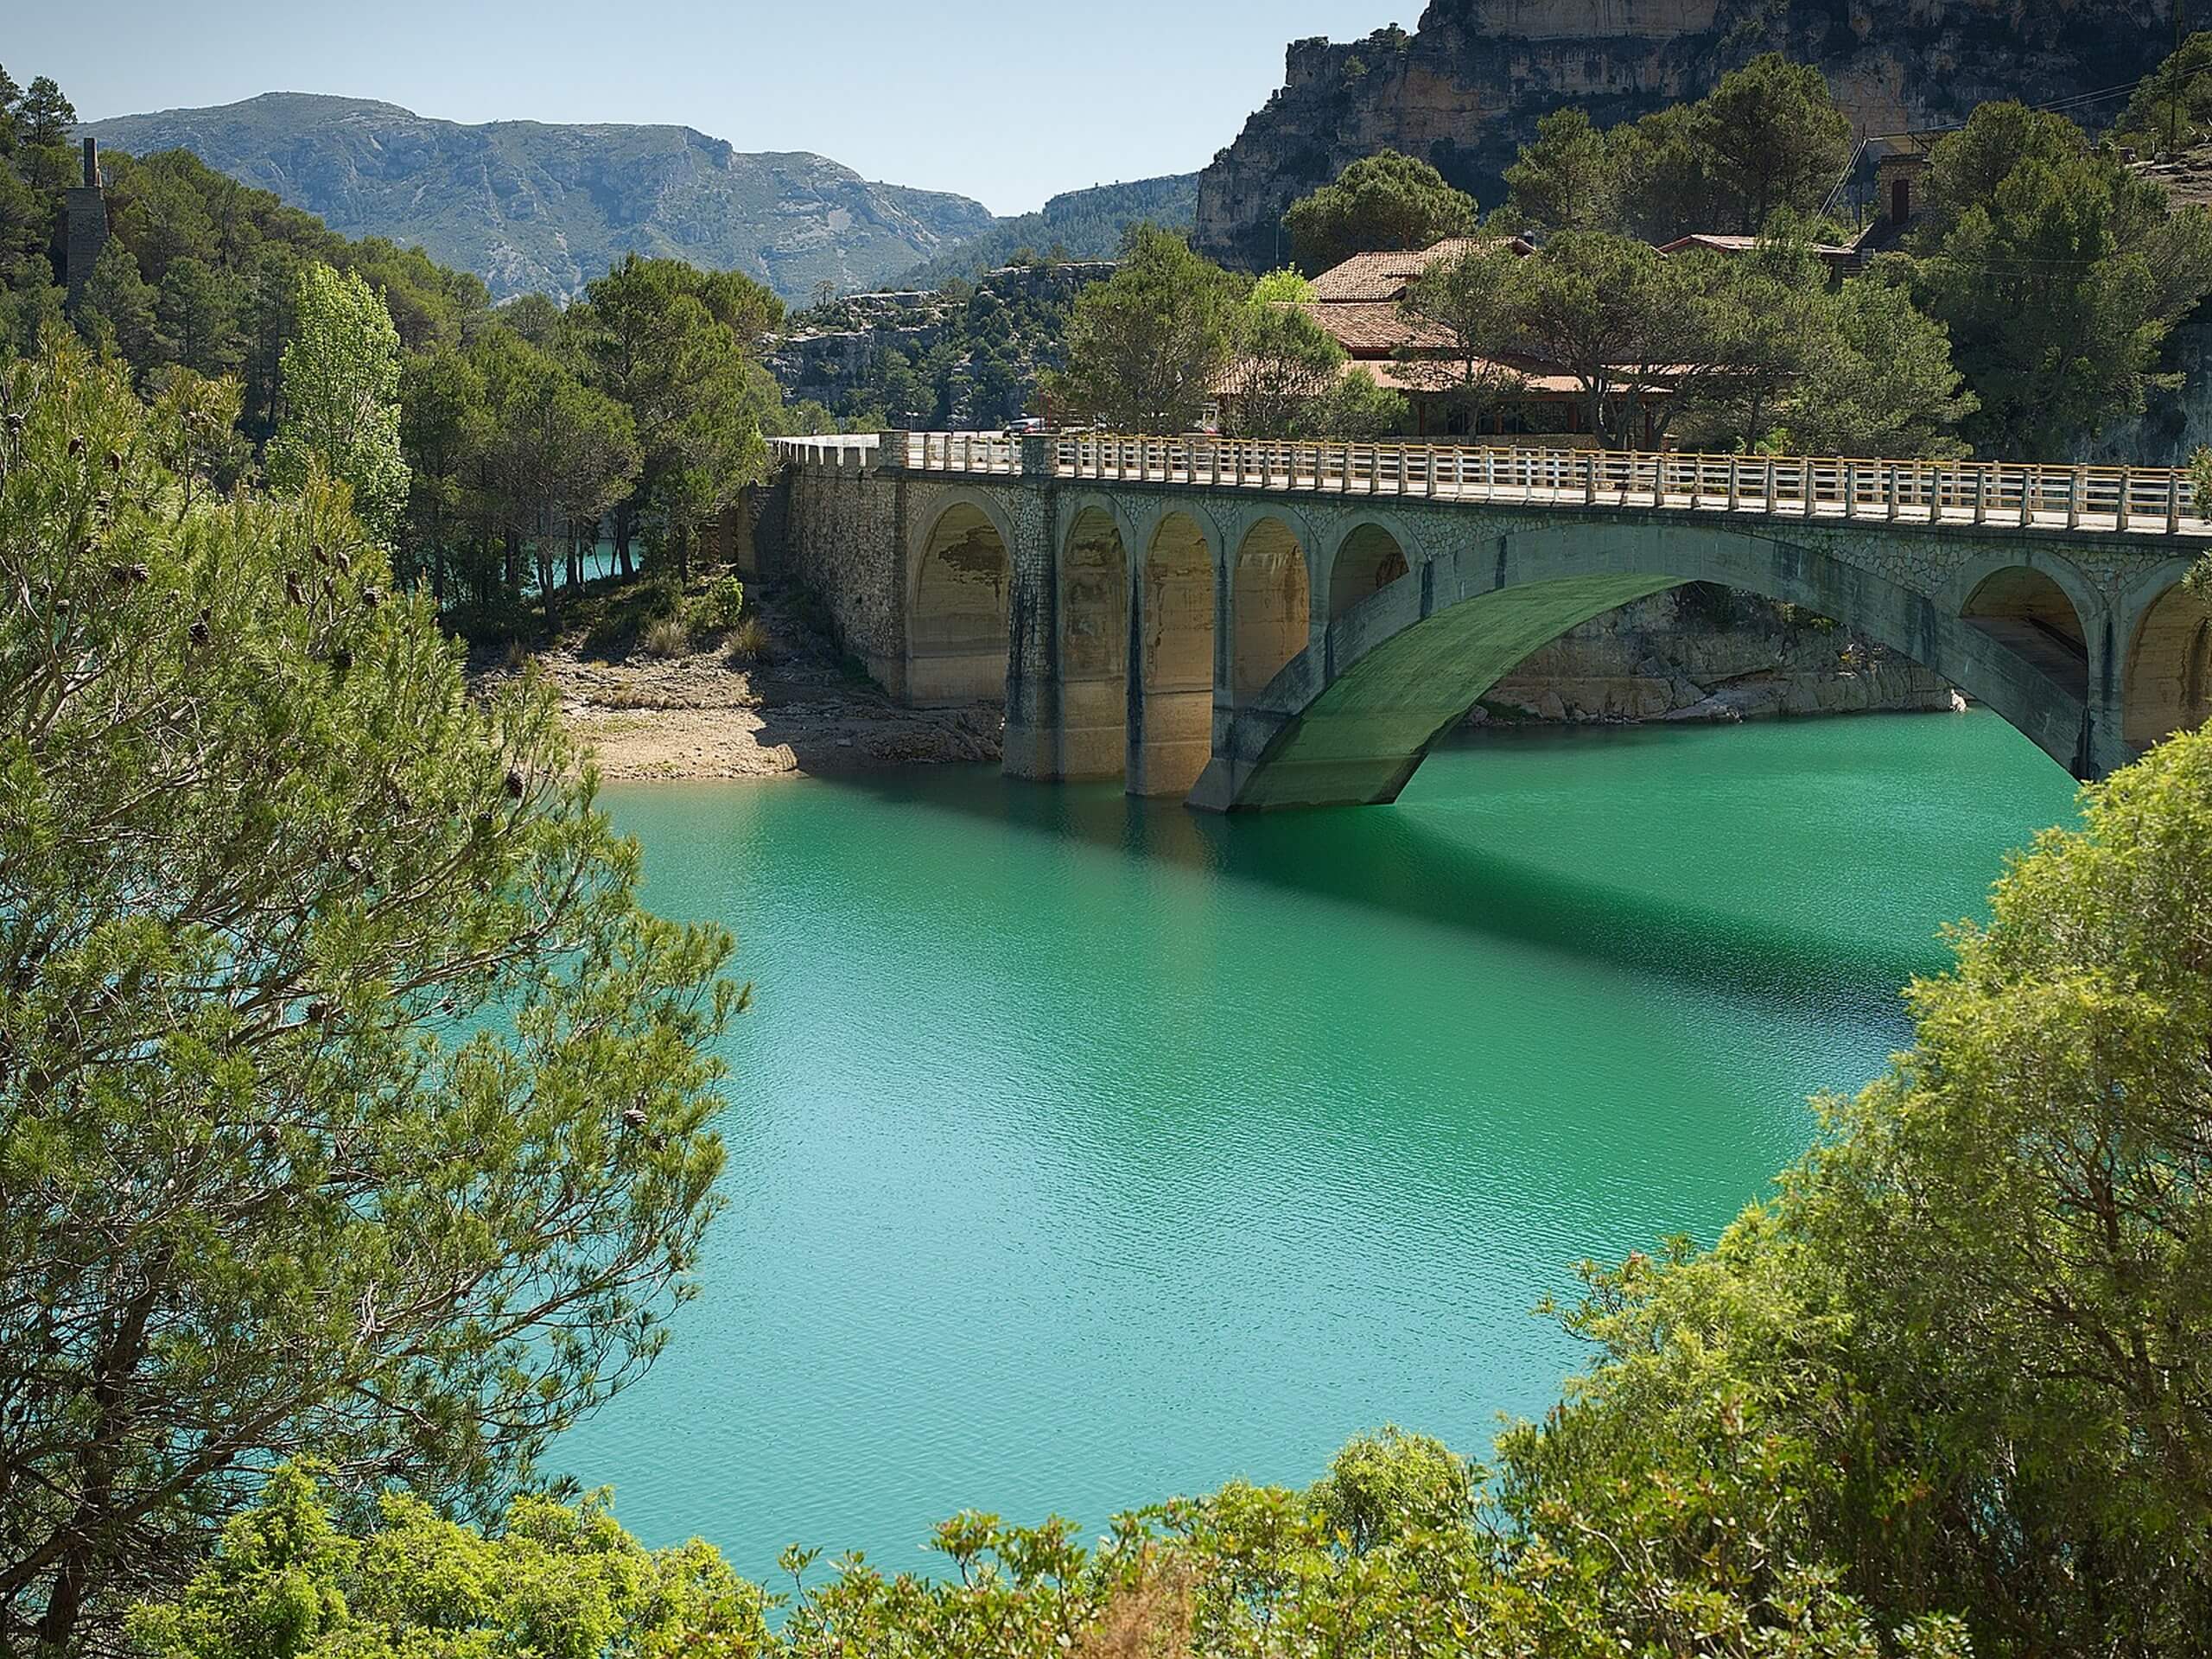 Beautiful rocky bridge over the turquoise water in Spain